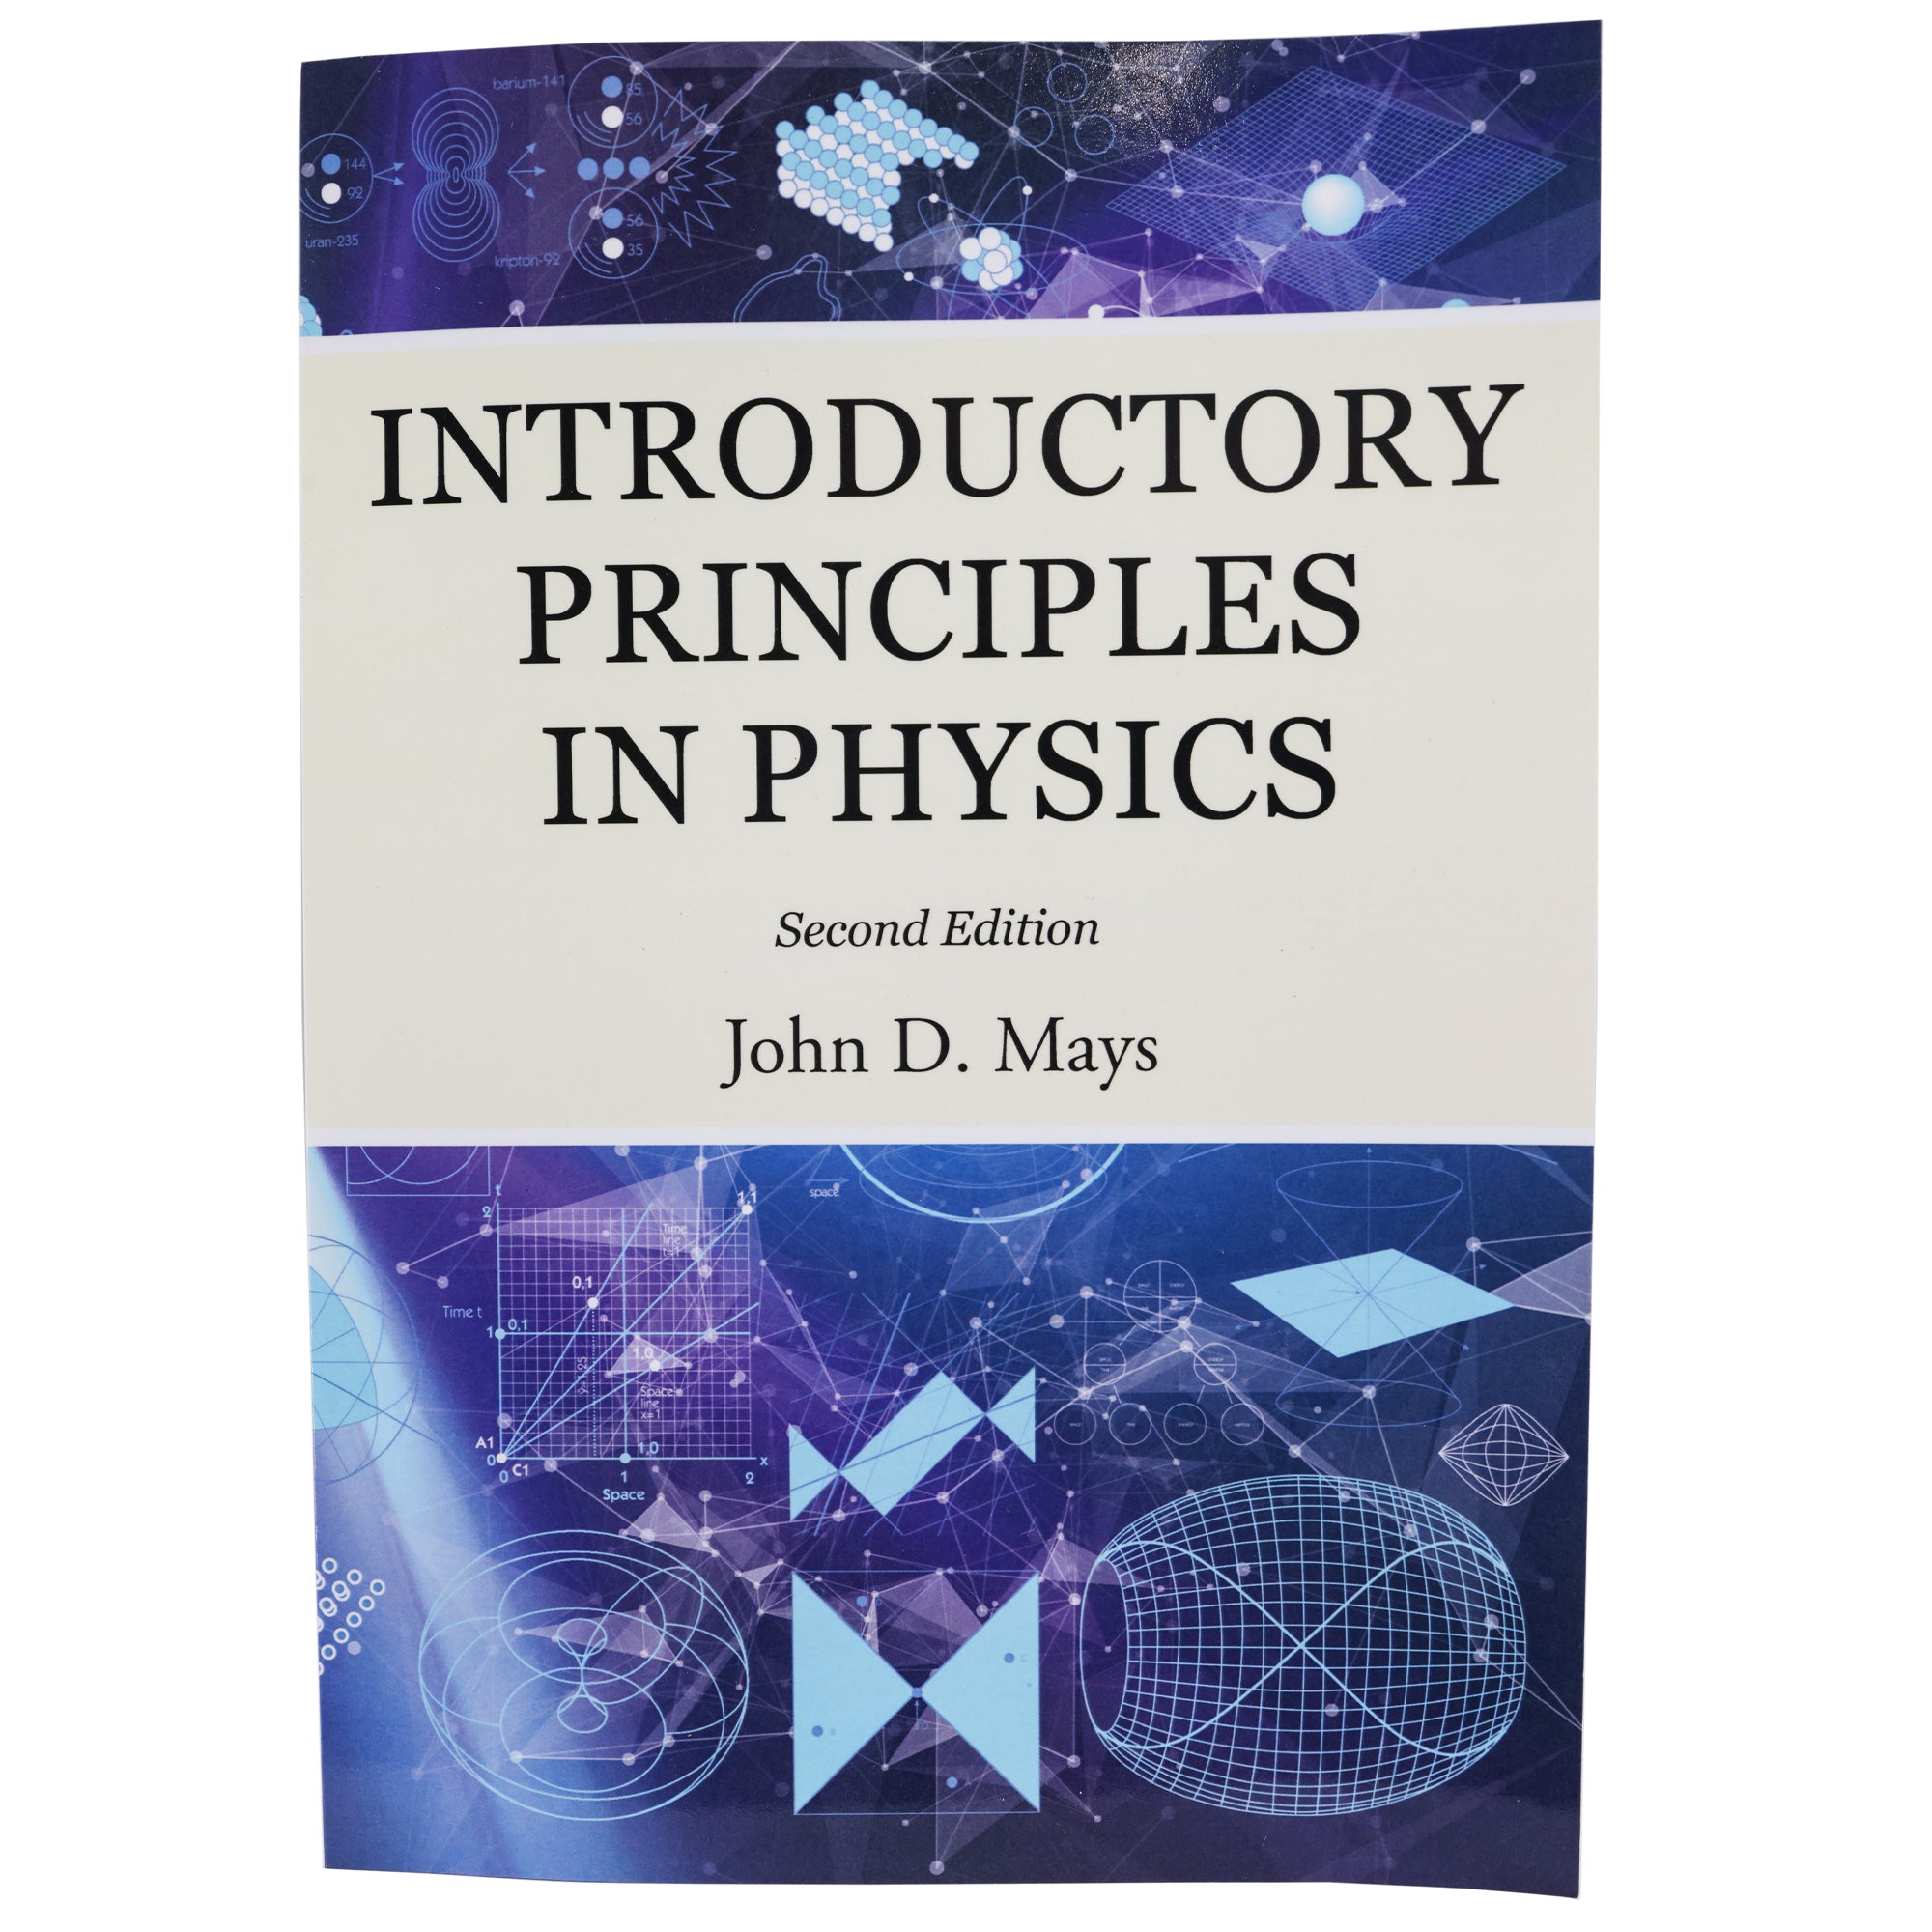 Introductory Principles in Physics Cover. The backgrounds is purples and blues with images of shapes and graphs in light blue and white. In the middle is a cream color with the title and author.